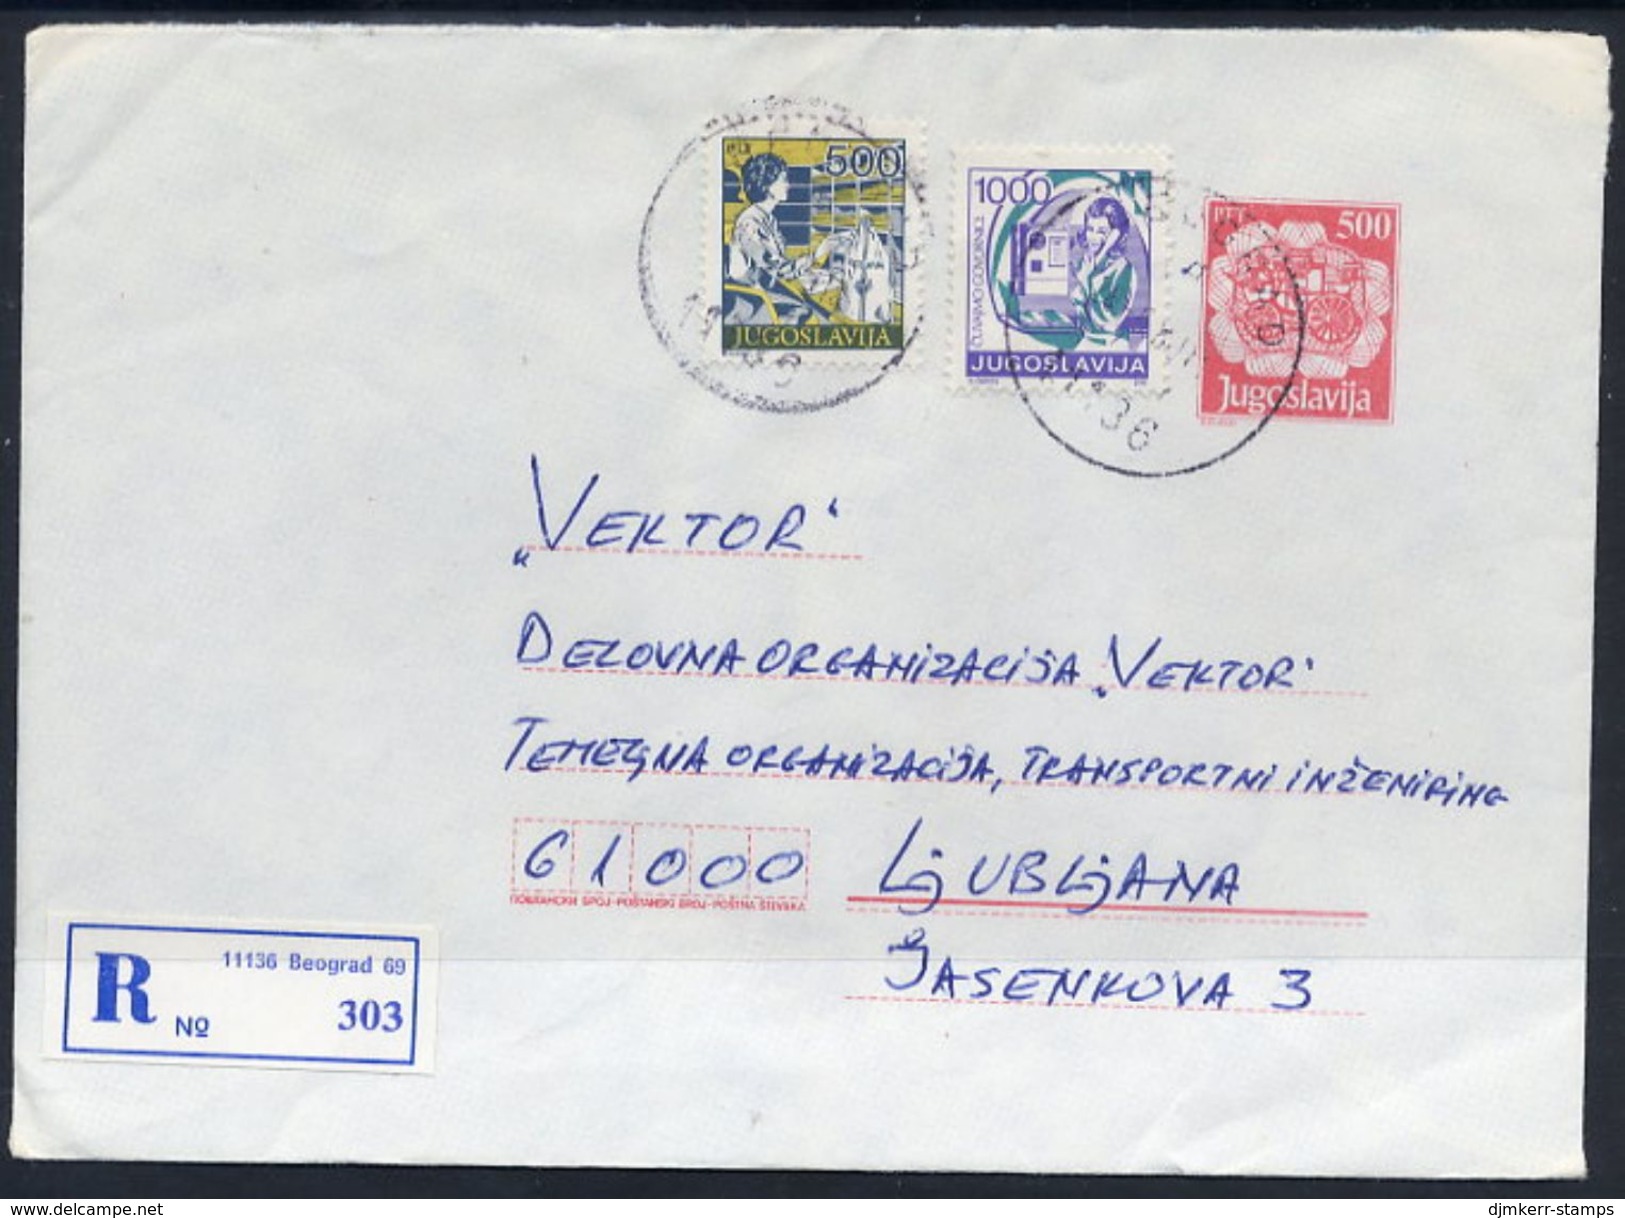 YUGOSLAVIA 1989 Mailcoach 500 D. Envelope Used With Additional Franking.  Michel U90 - Entiers Postaux